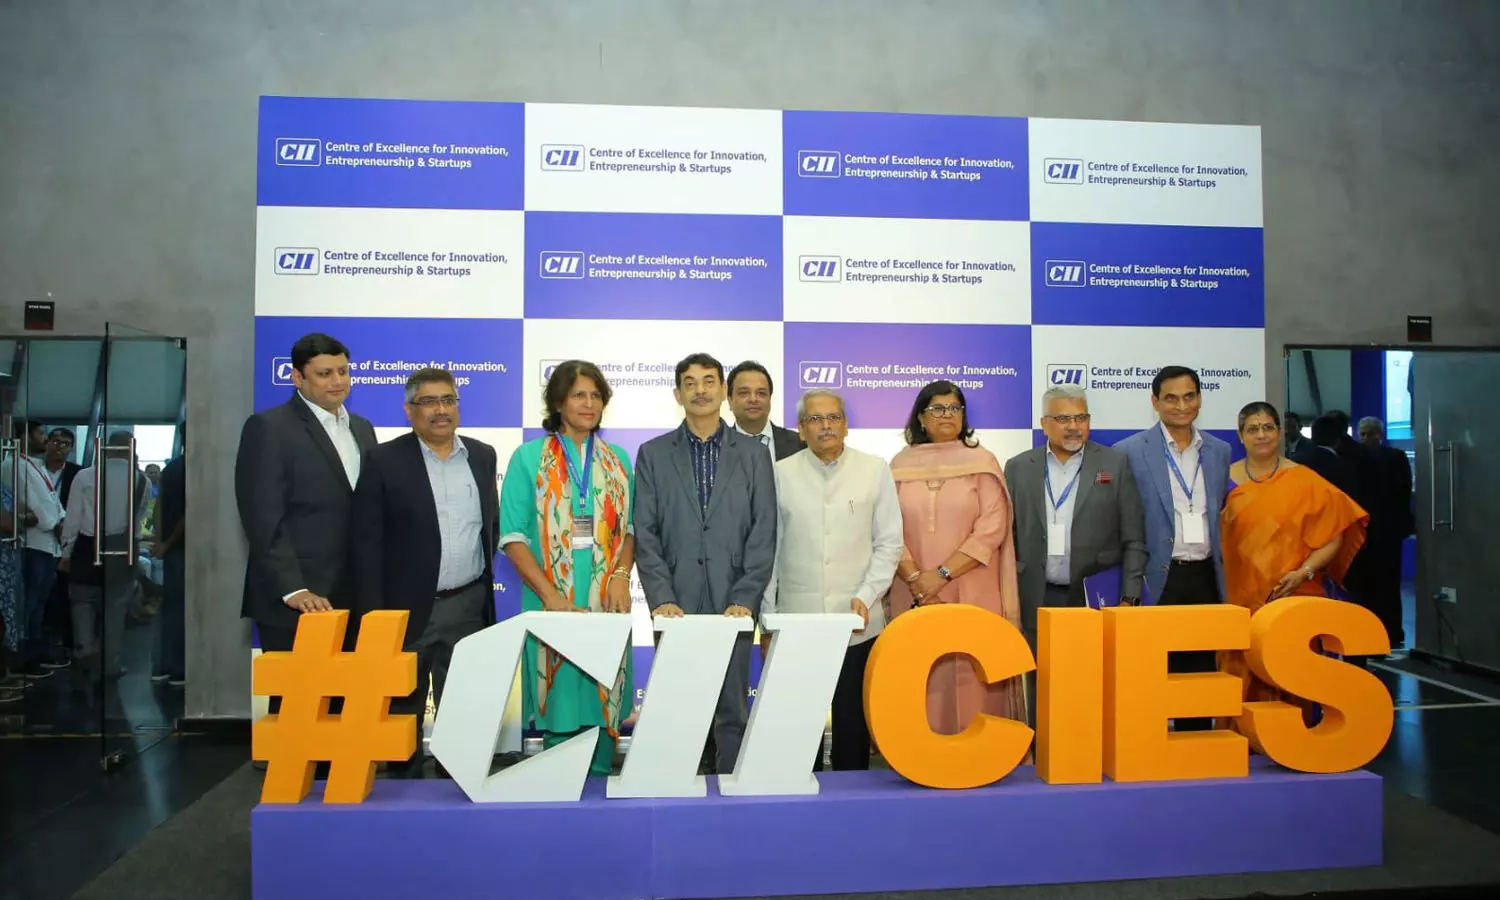 CIES of CII to help startups incubated by it USD 100-million companies, says Kris Gopalakrishnan